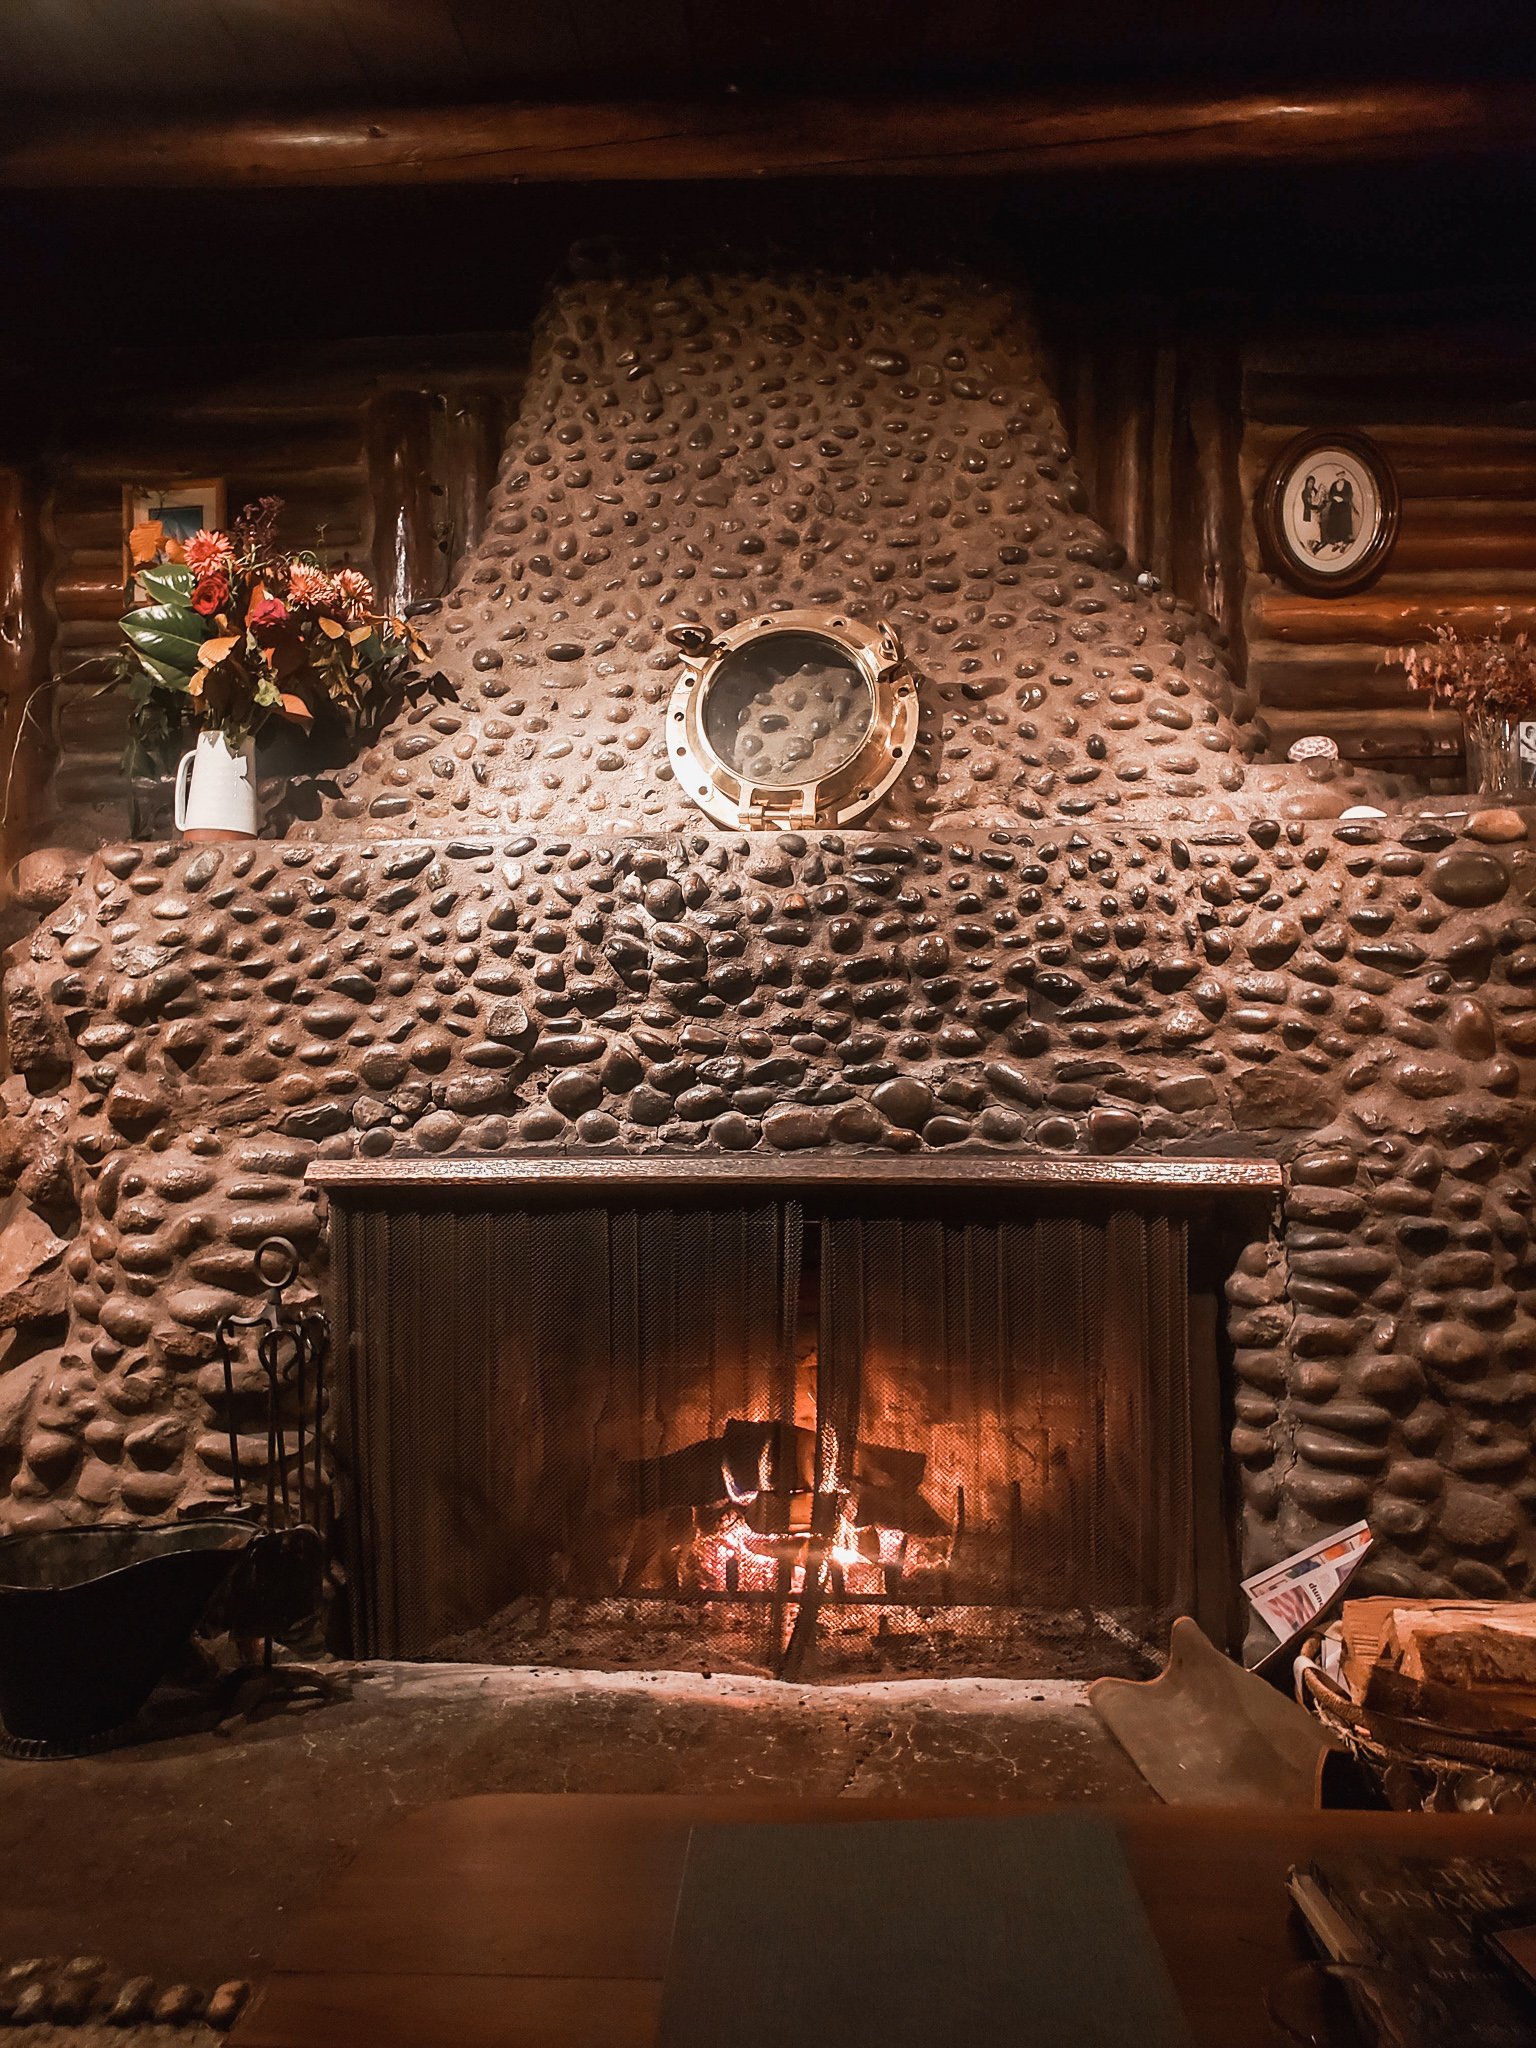 Original fireplace at Captain Whidbey Inn on Whidbey Island, Washington